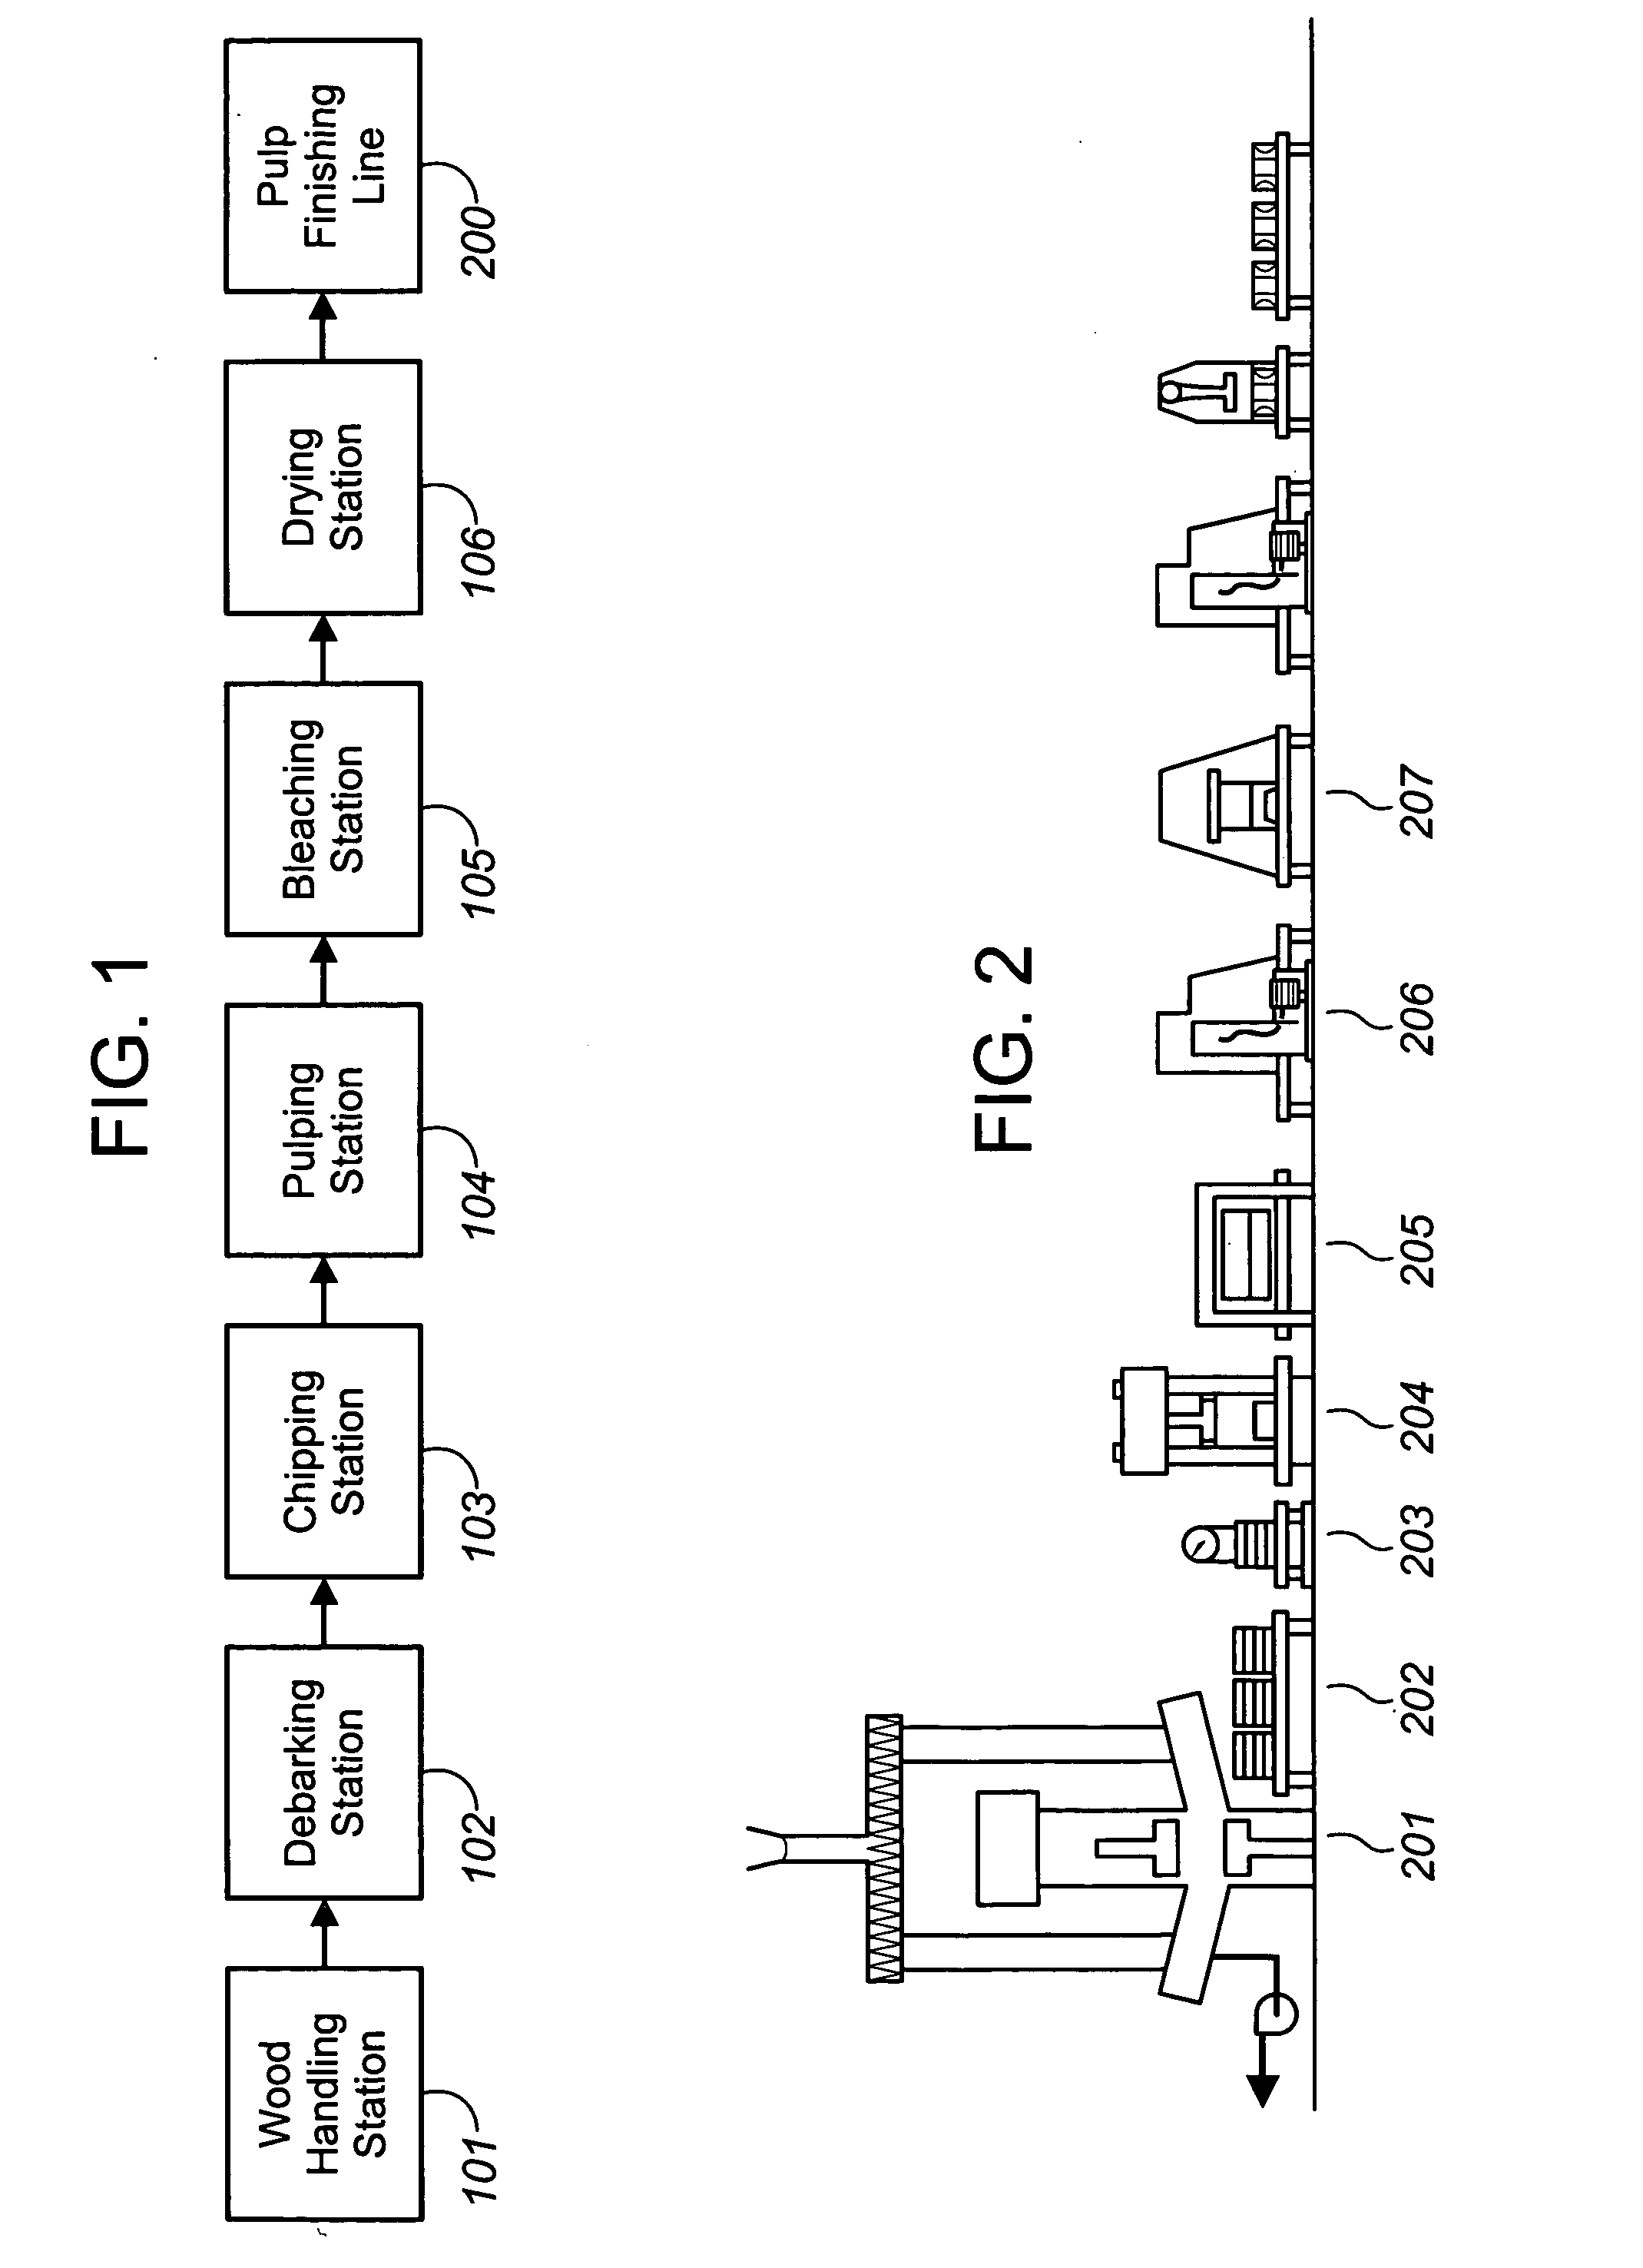 Apparatus and method for obtaining a reflectance property indication of a sample